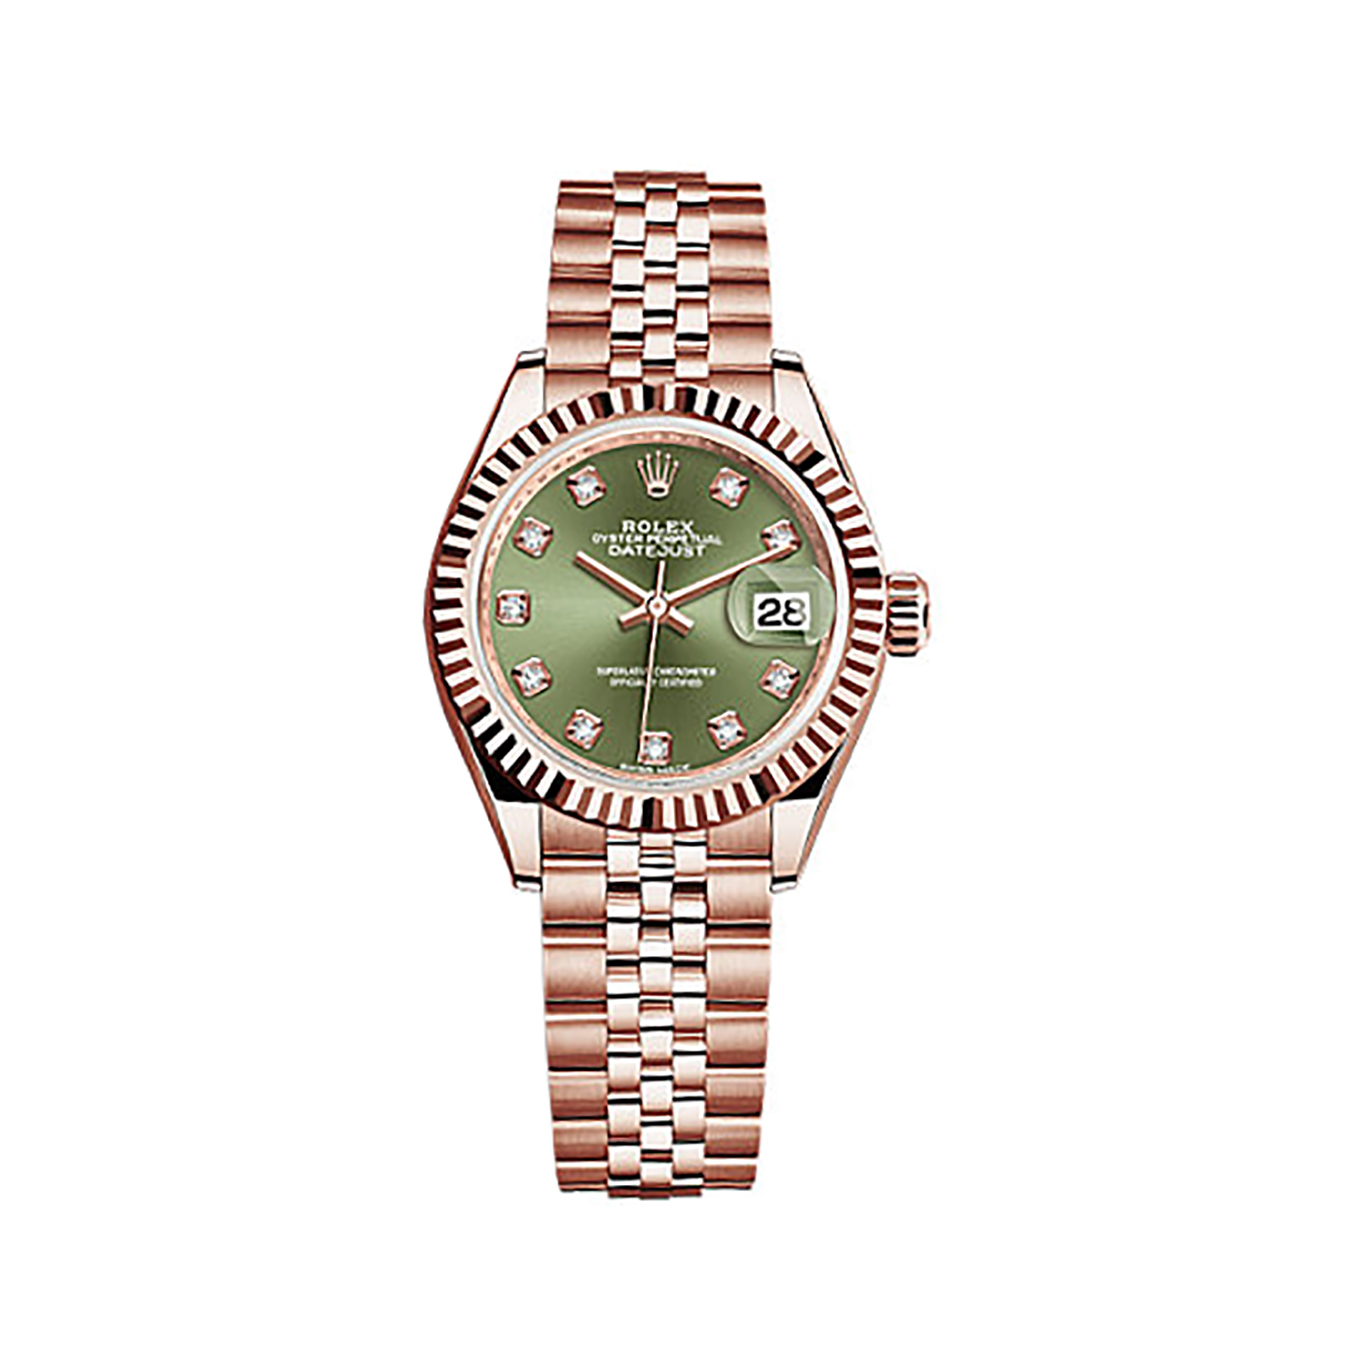 Lady-Datejust 28 279175 Rose Gold Watch (Olive Green Set with Diamonds)